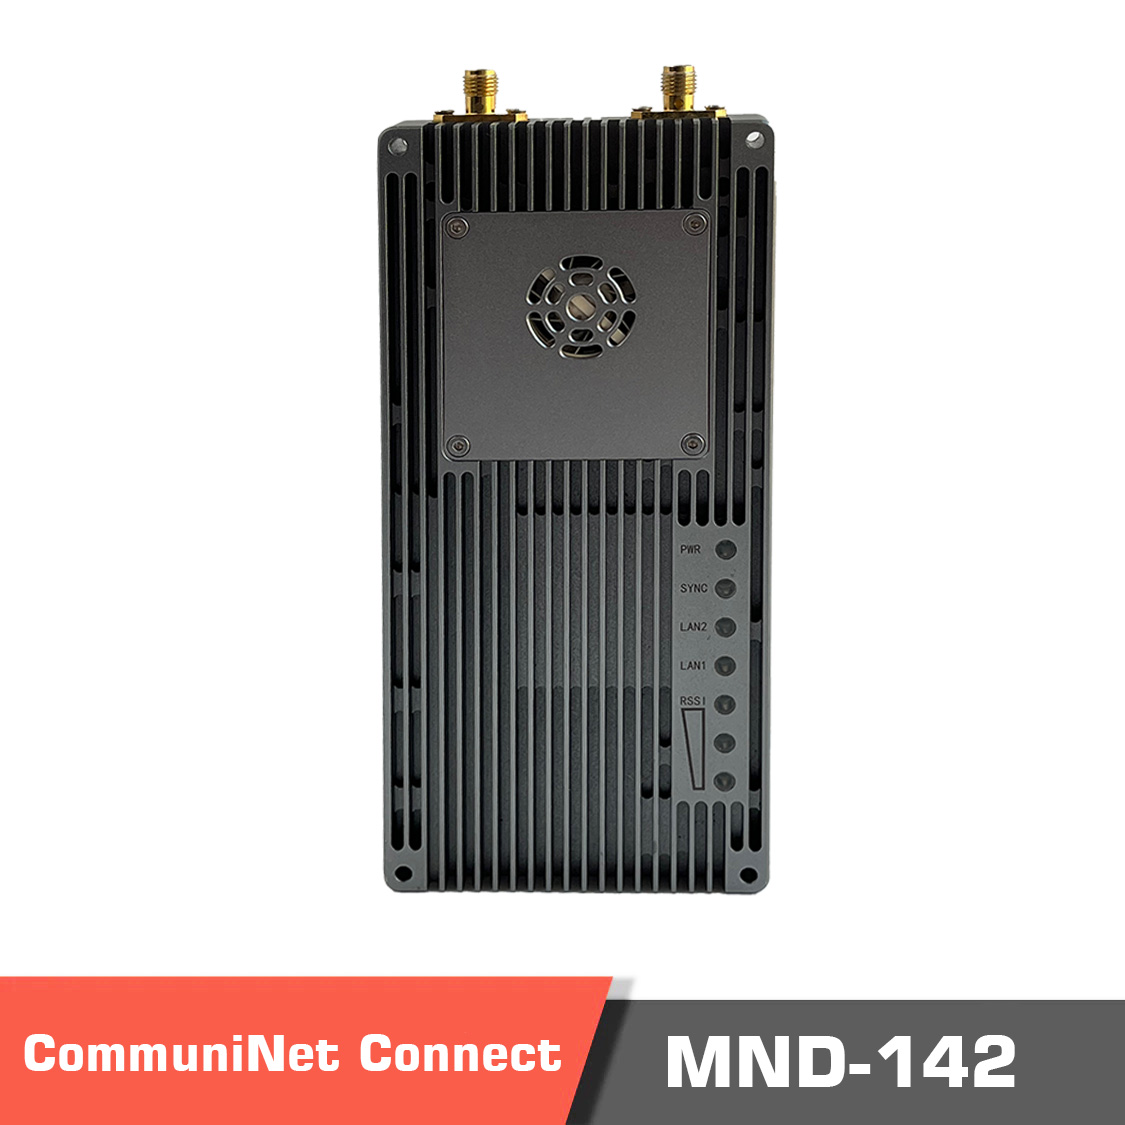 Communinet connect mnd 142temp. 18 - viulinx fx 1w dual,viulinx fx 1w,viulinx,long range digital video telemetry,digital video telemetry,fpv video transmitter,video and data link,long range rc controller,long range control,long range data link,drone wireless link,antenna tracker,viulinx fx 1w with antenna tracker,viulinx fx 1w handover capability,handover capability,viulinx fx 1w long range digital link,1w long range digital link with handover capability,1w long range digital link,dual input datalink,dual input videolink,1w transmission power,33dbm transmission power - motionew - 2